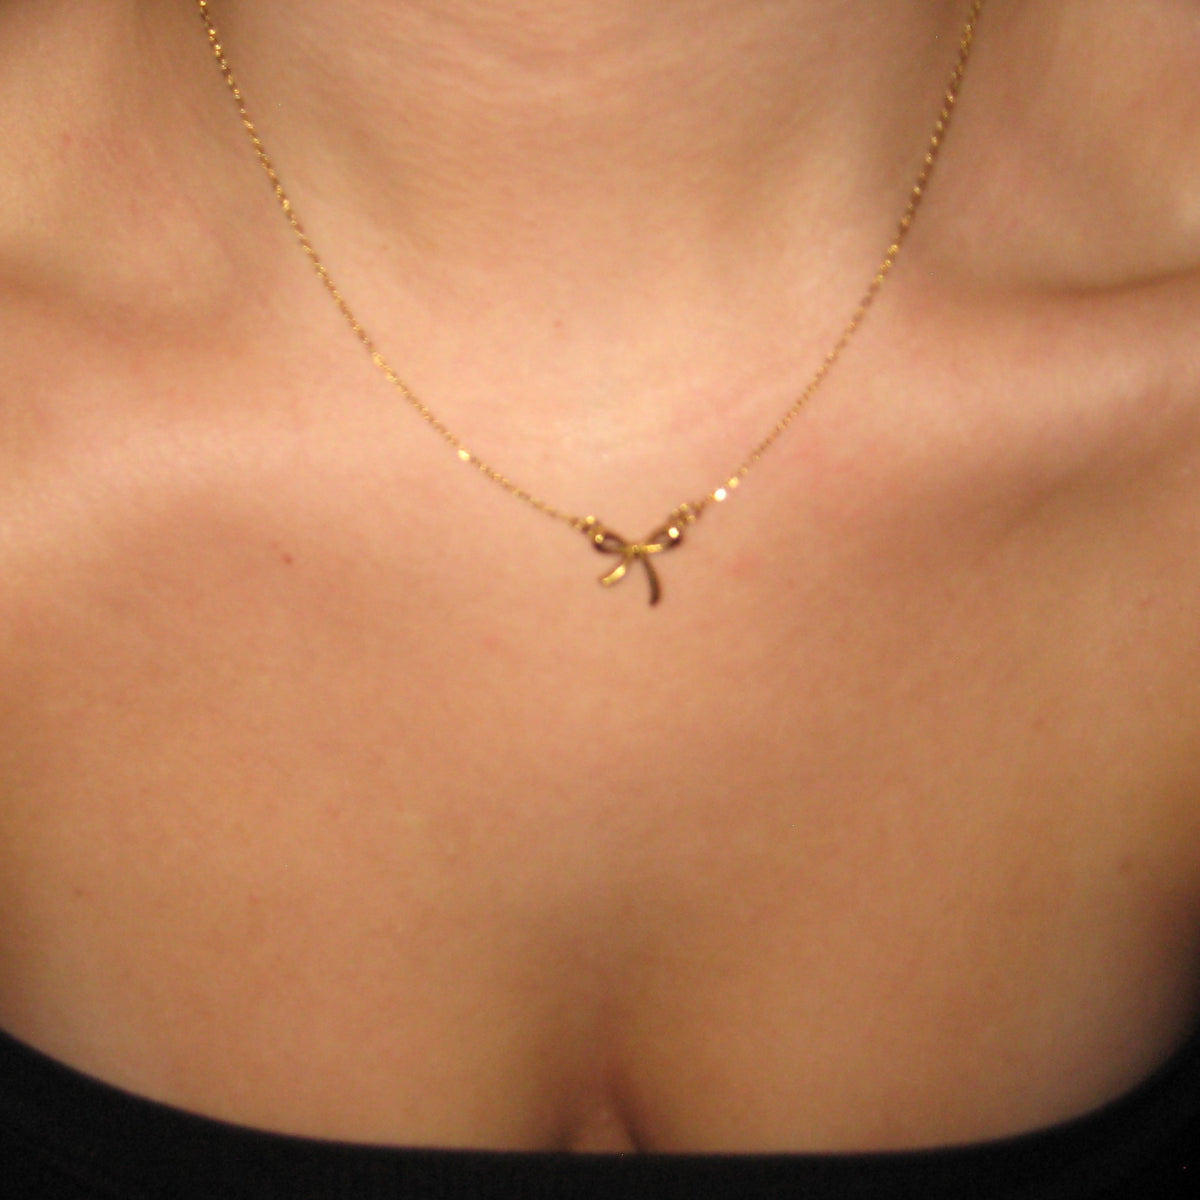 BOWTIFUL necklace - Gold